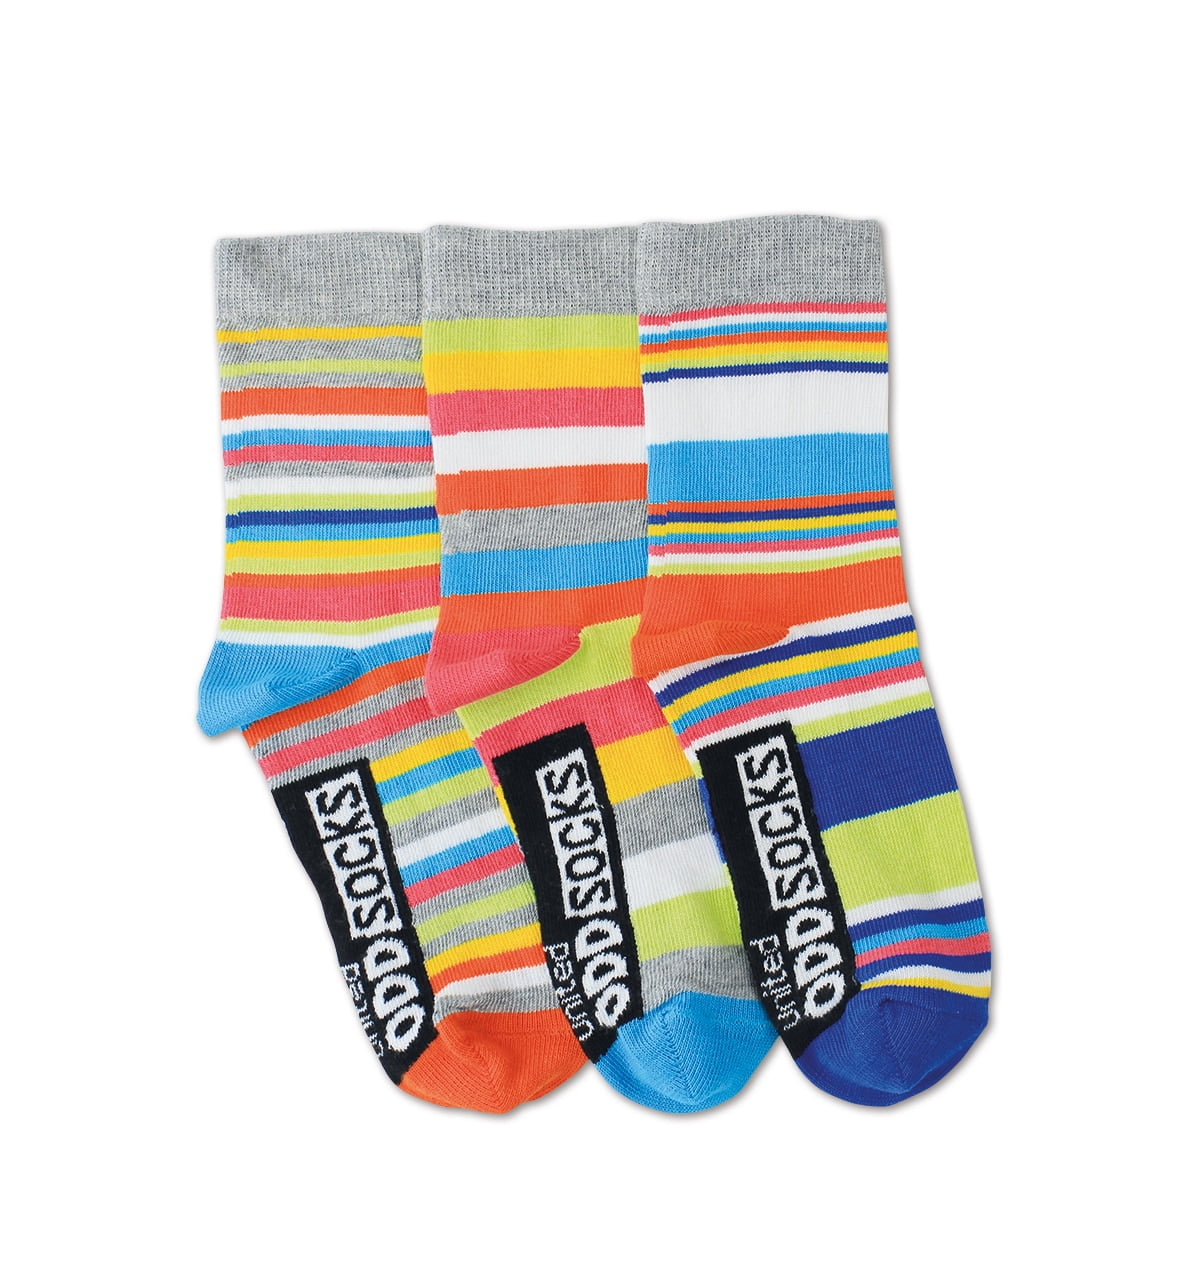 Rainbow Socks Hombre Mujer Calcetines Deporte 6 Pares 